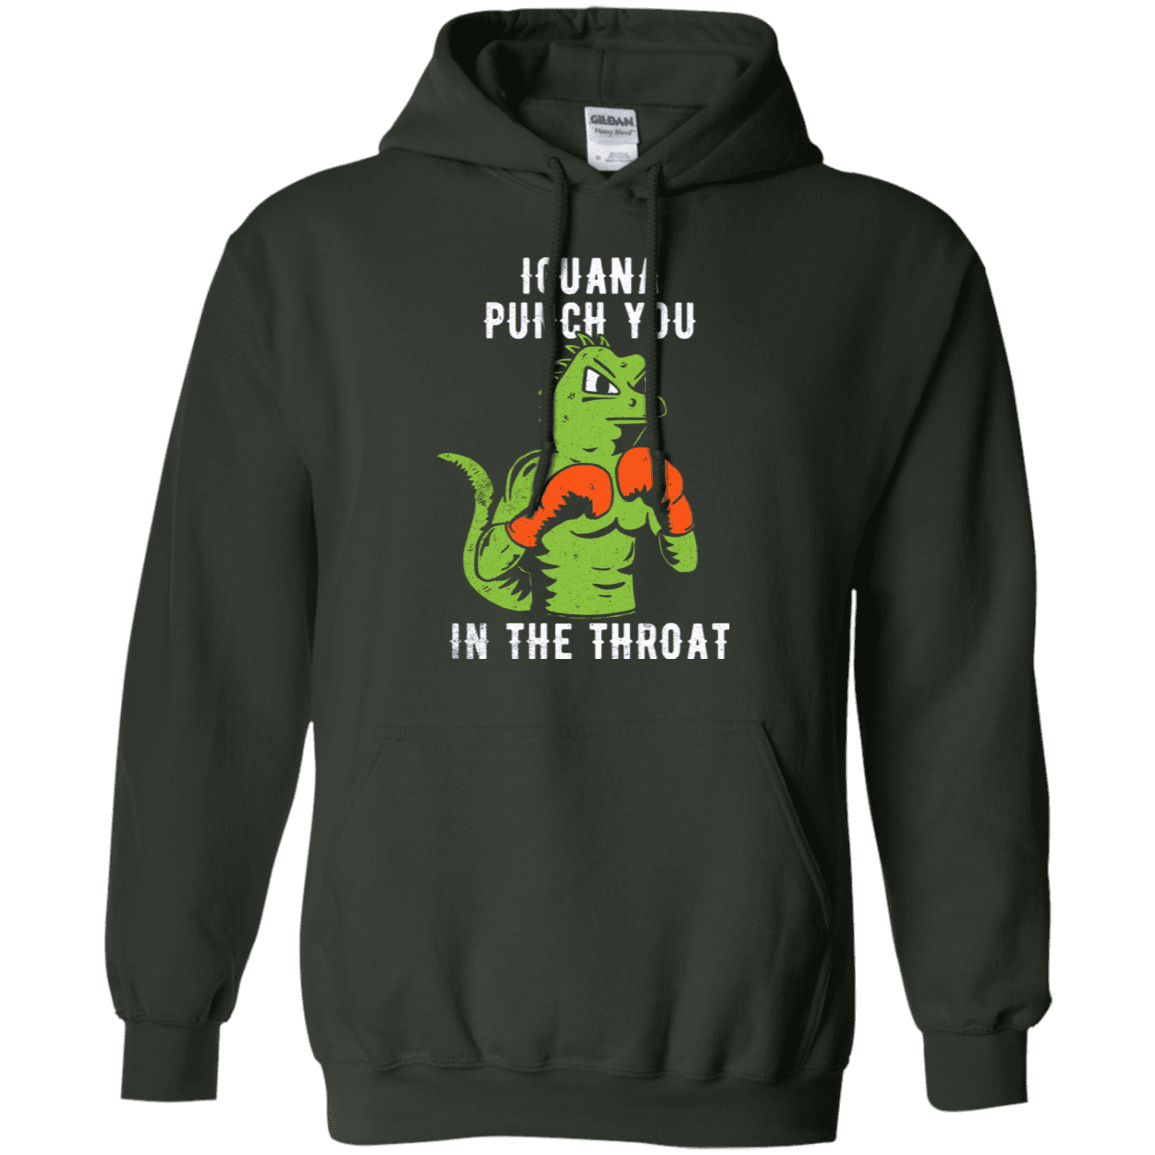 Sweatshirts Forest Green / S Iguana Punch You Pullover Hoodie